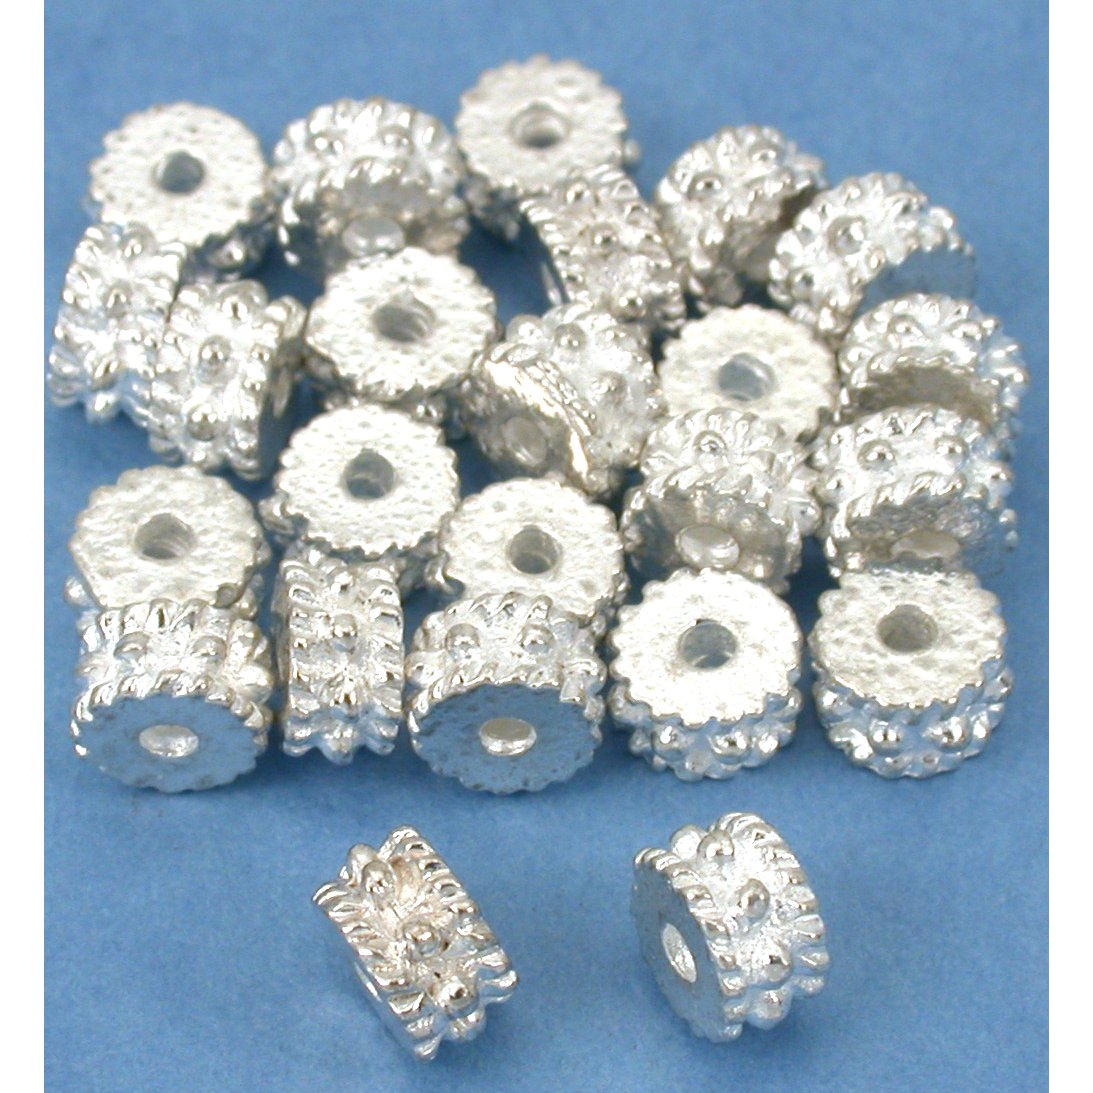 Bali Rondelle Spacer Beads Silver Plated 4mm Approx 25